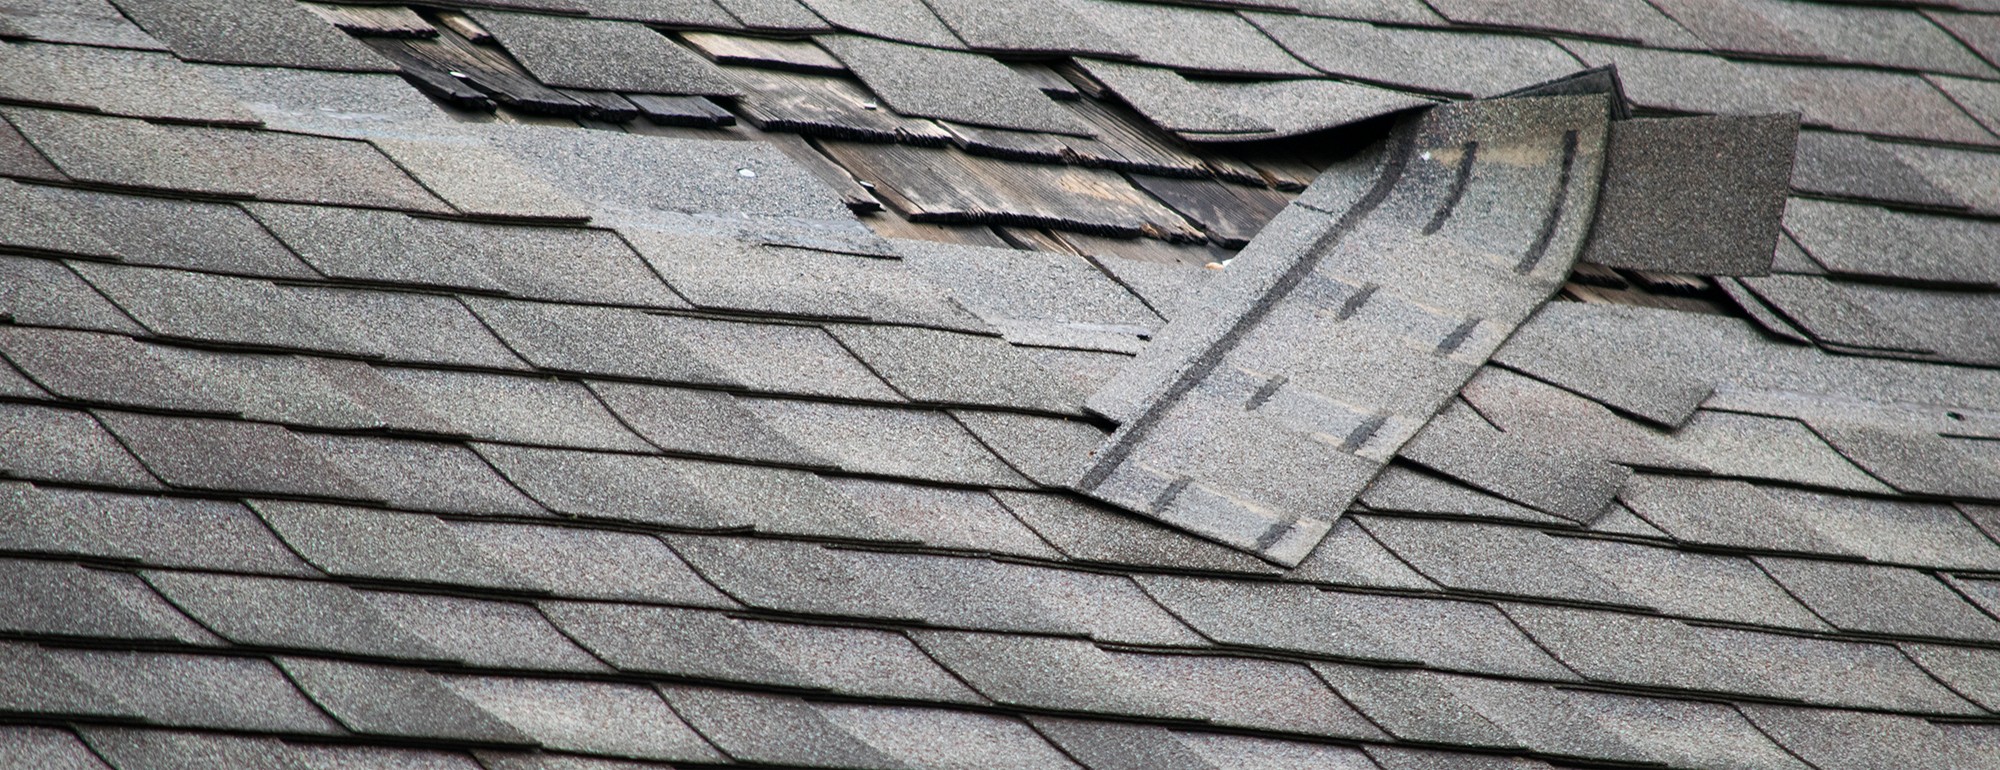 Asphalt Roof Repair Replacement Shingles on Roof in Indianapolis